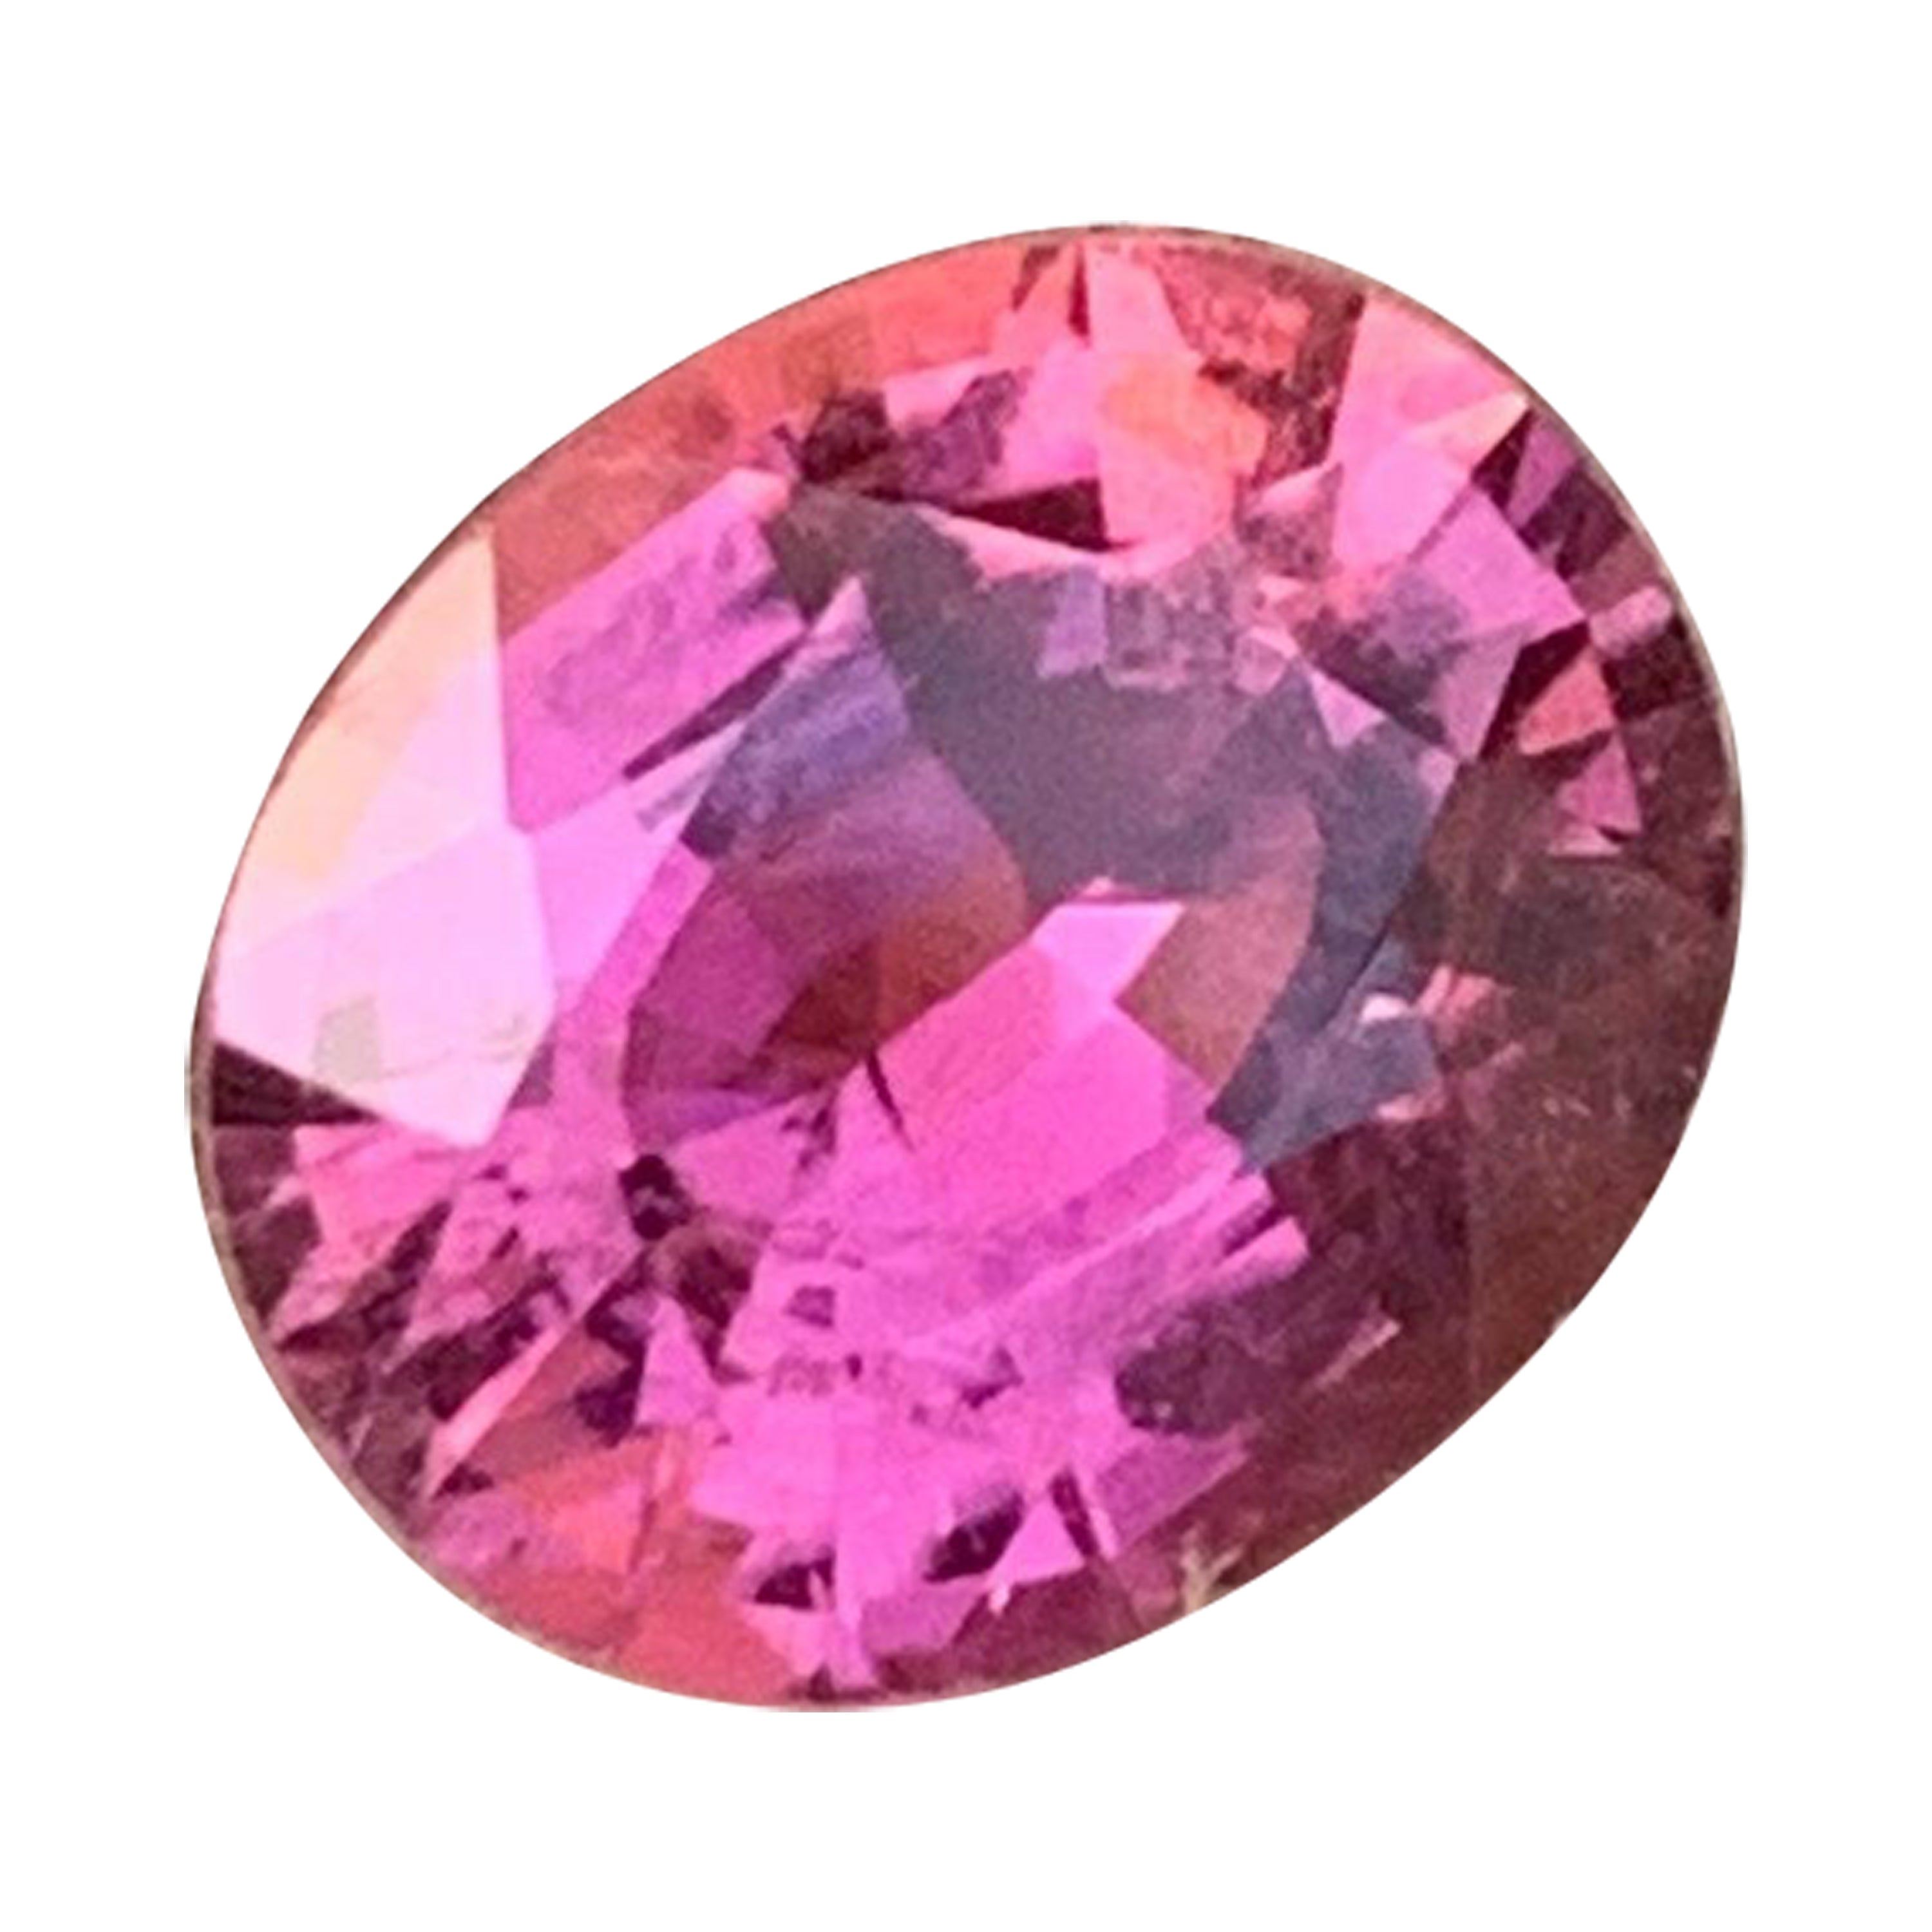 Natural Hot Pink Tourmaline Stone 2.05 Carats Tourmaline Stone for Jewellery For Sale